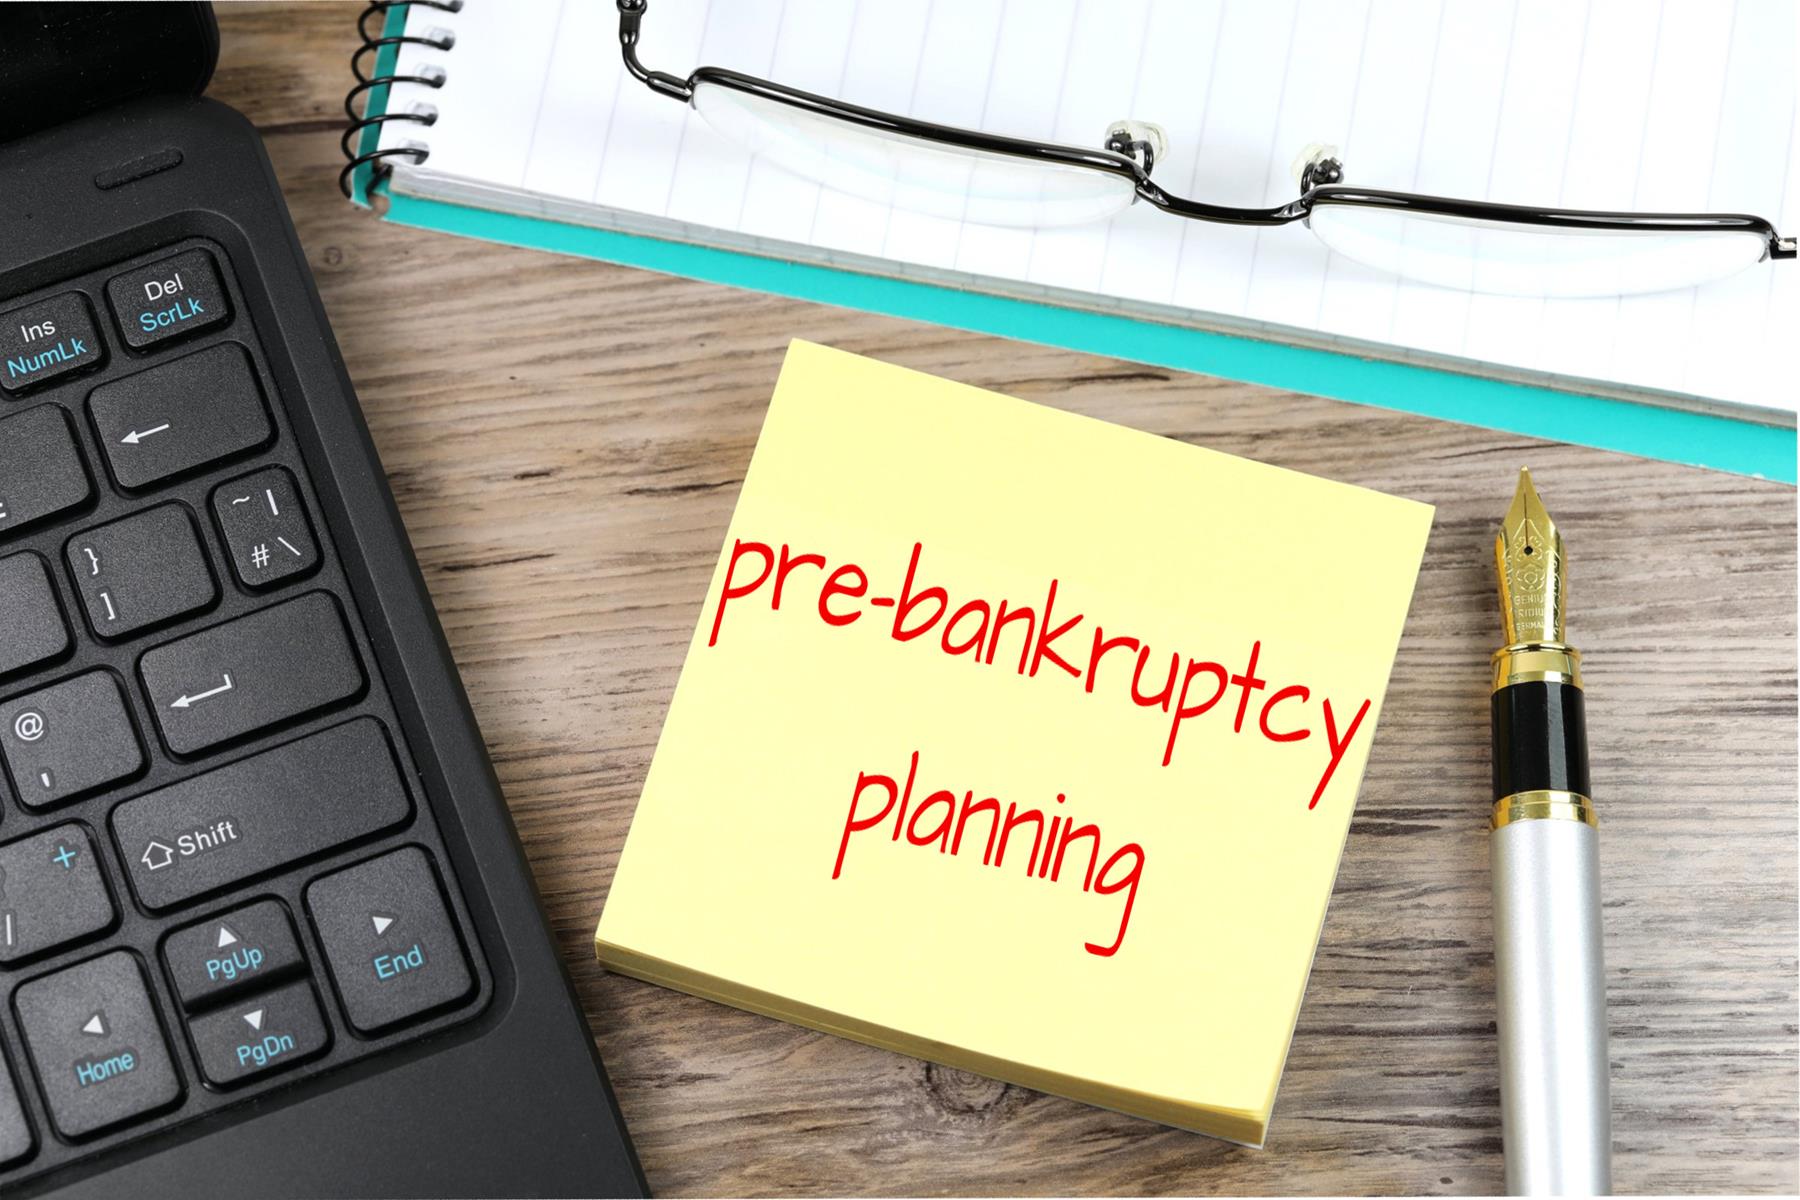 Pre Bankruptcy Planning